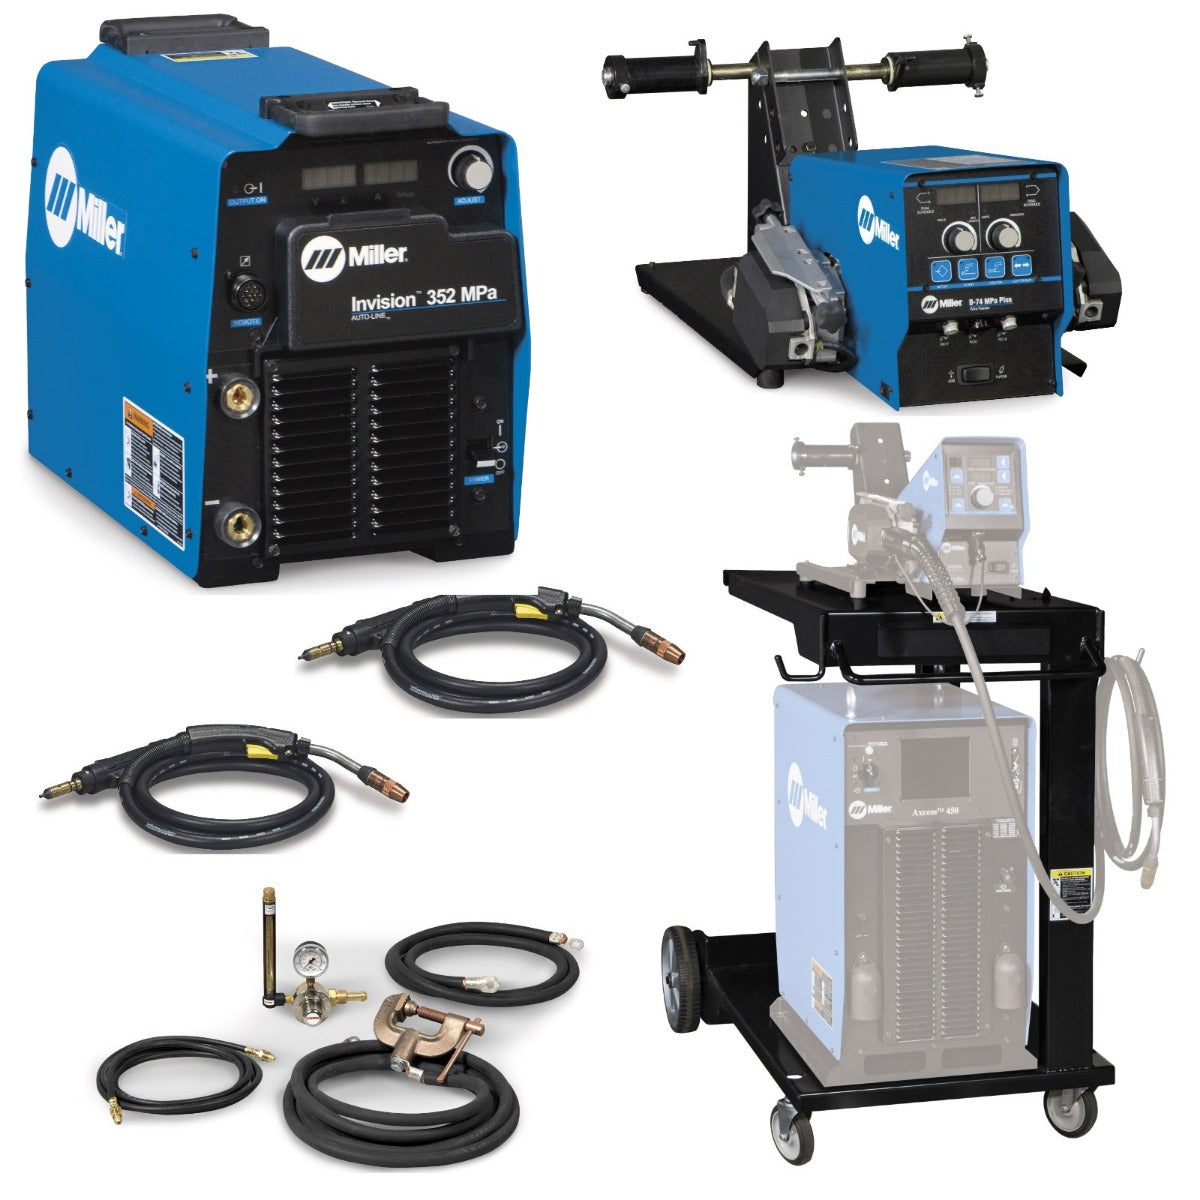 Miller Invision 352 MPa MIG Welder with D-74 Feeder, Accessory Package, and Cart (951500)